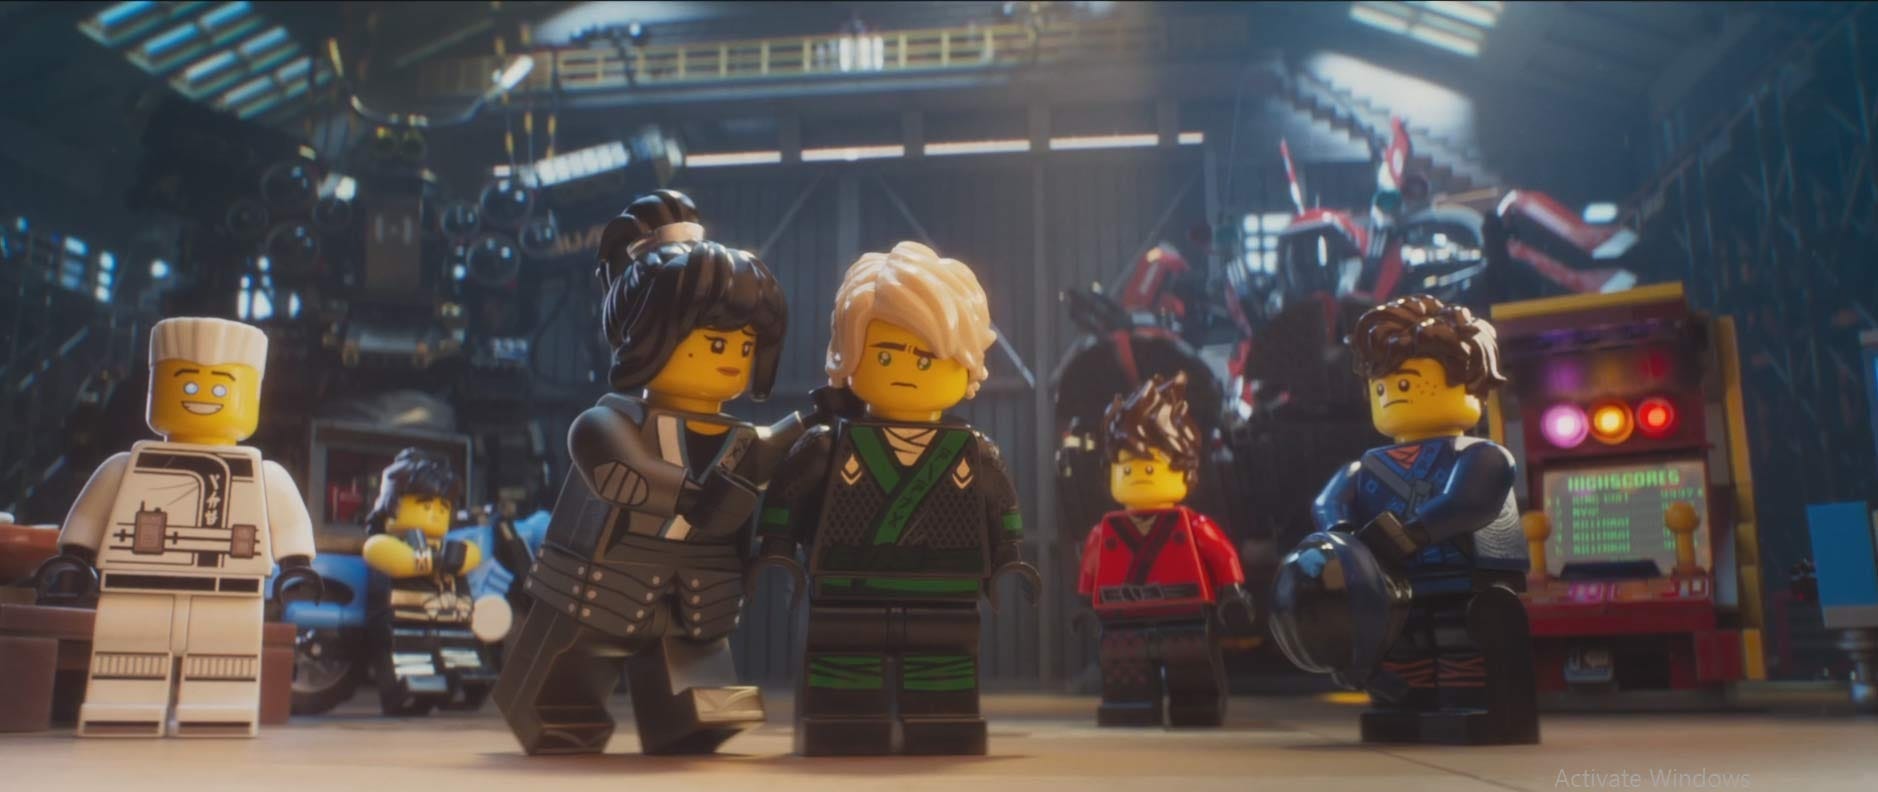 LEGO Movie' builds on teen years